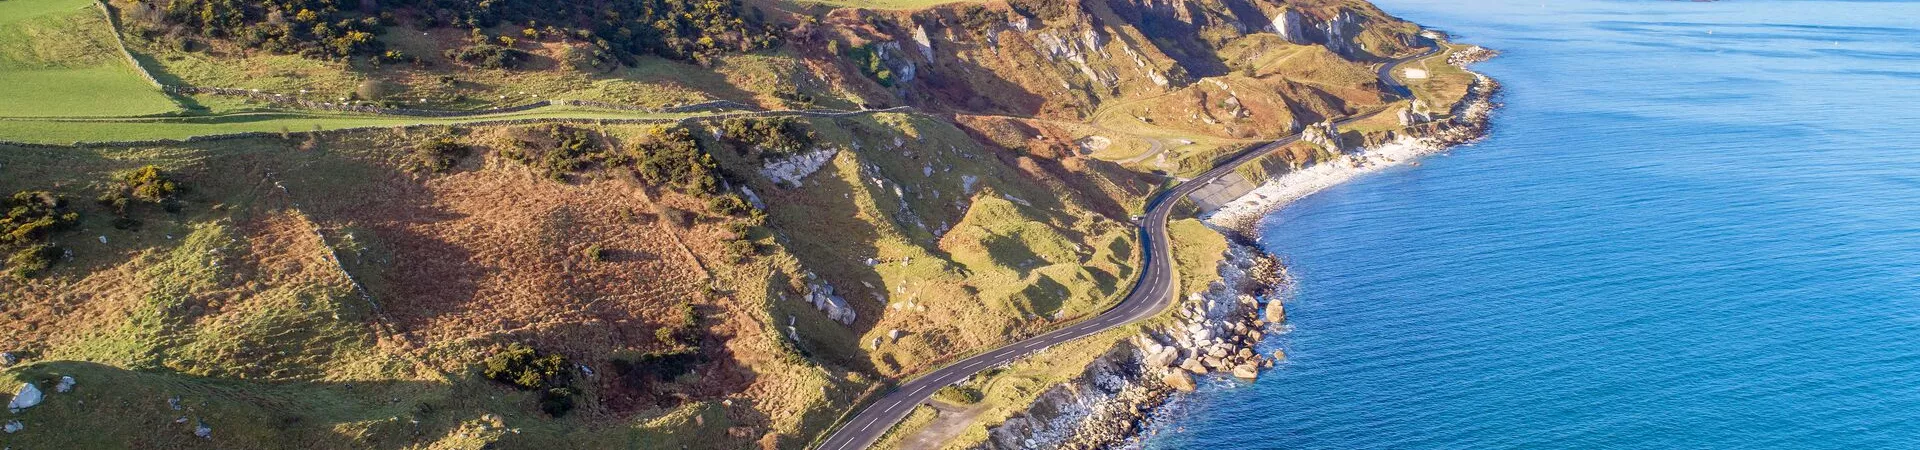 Causeway coastal route on a sunny day